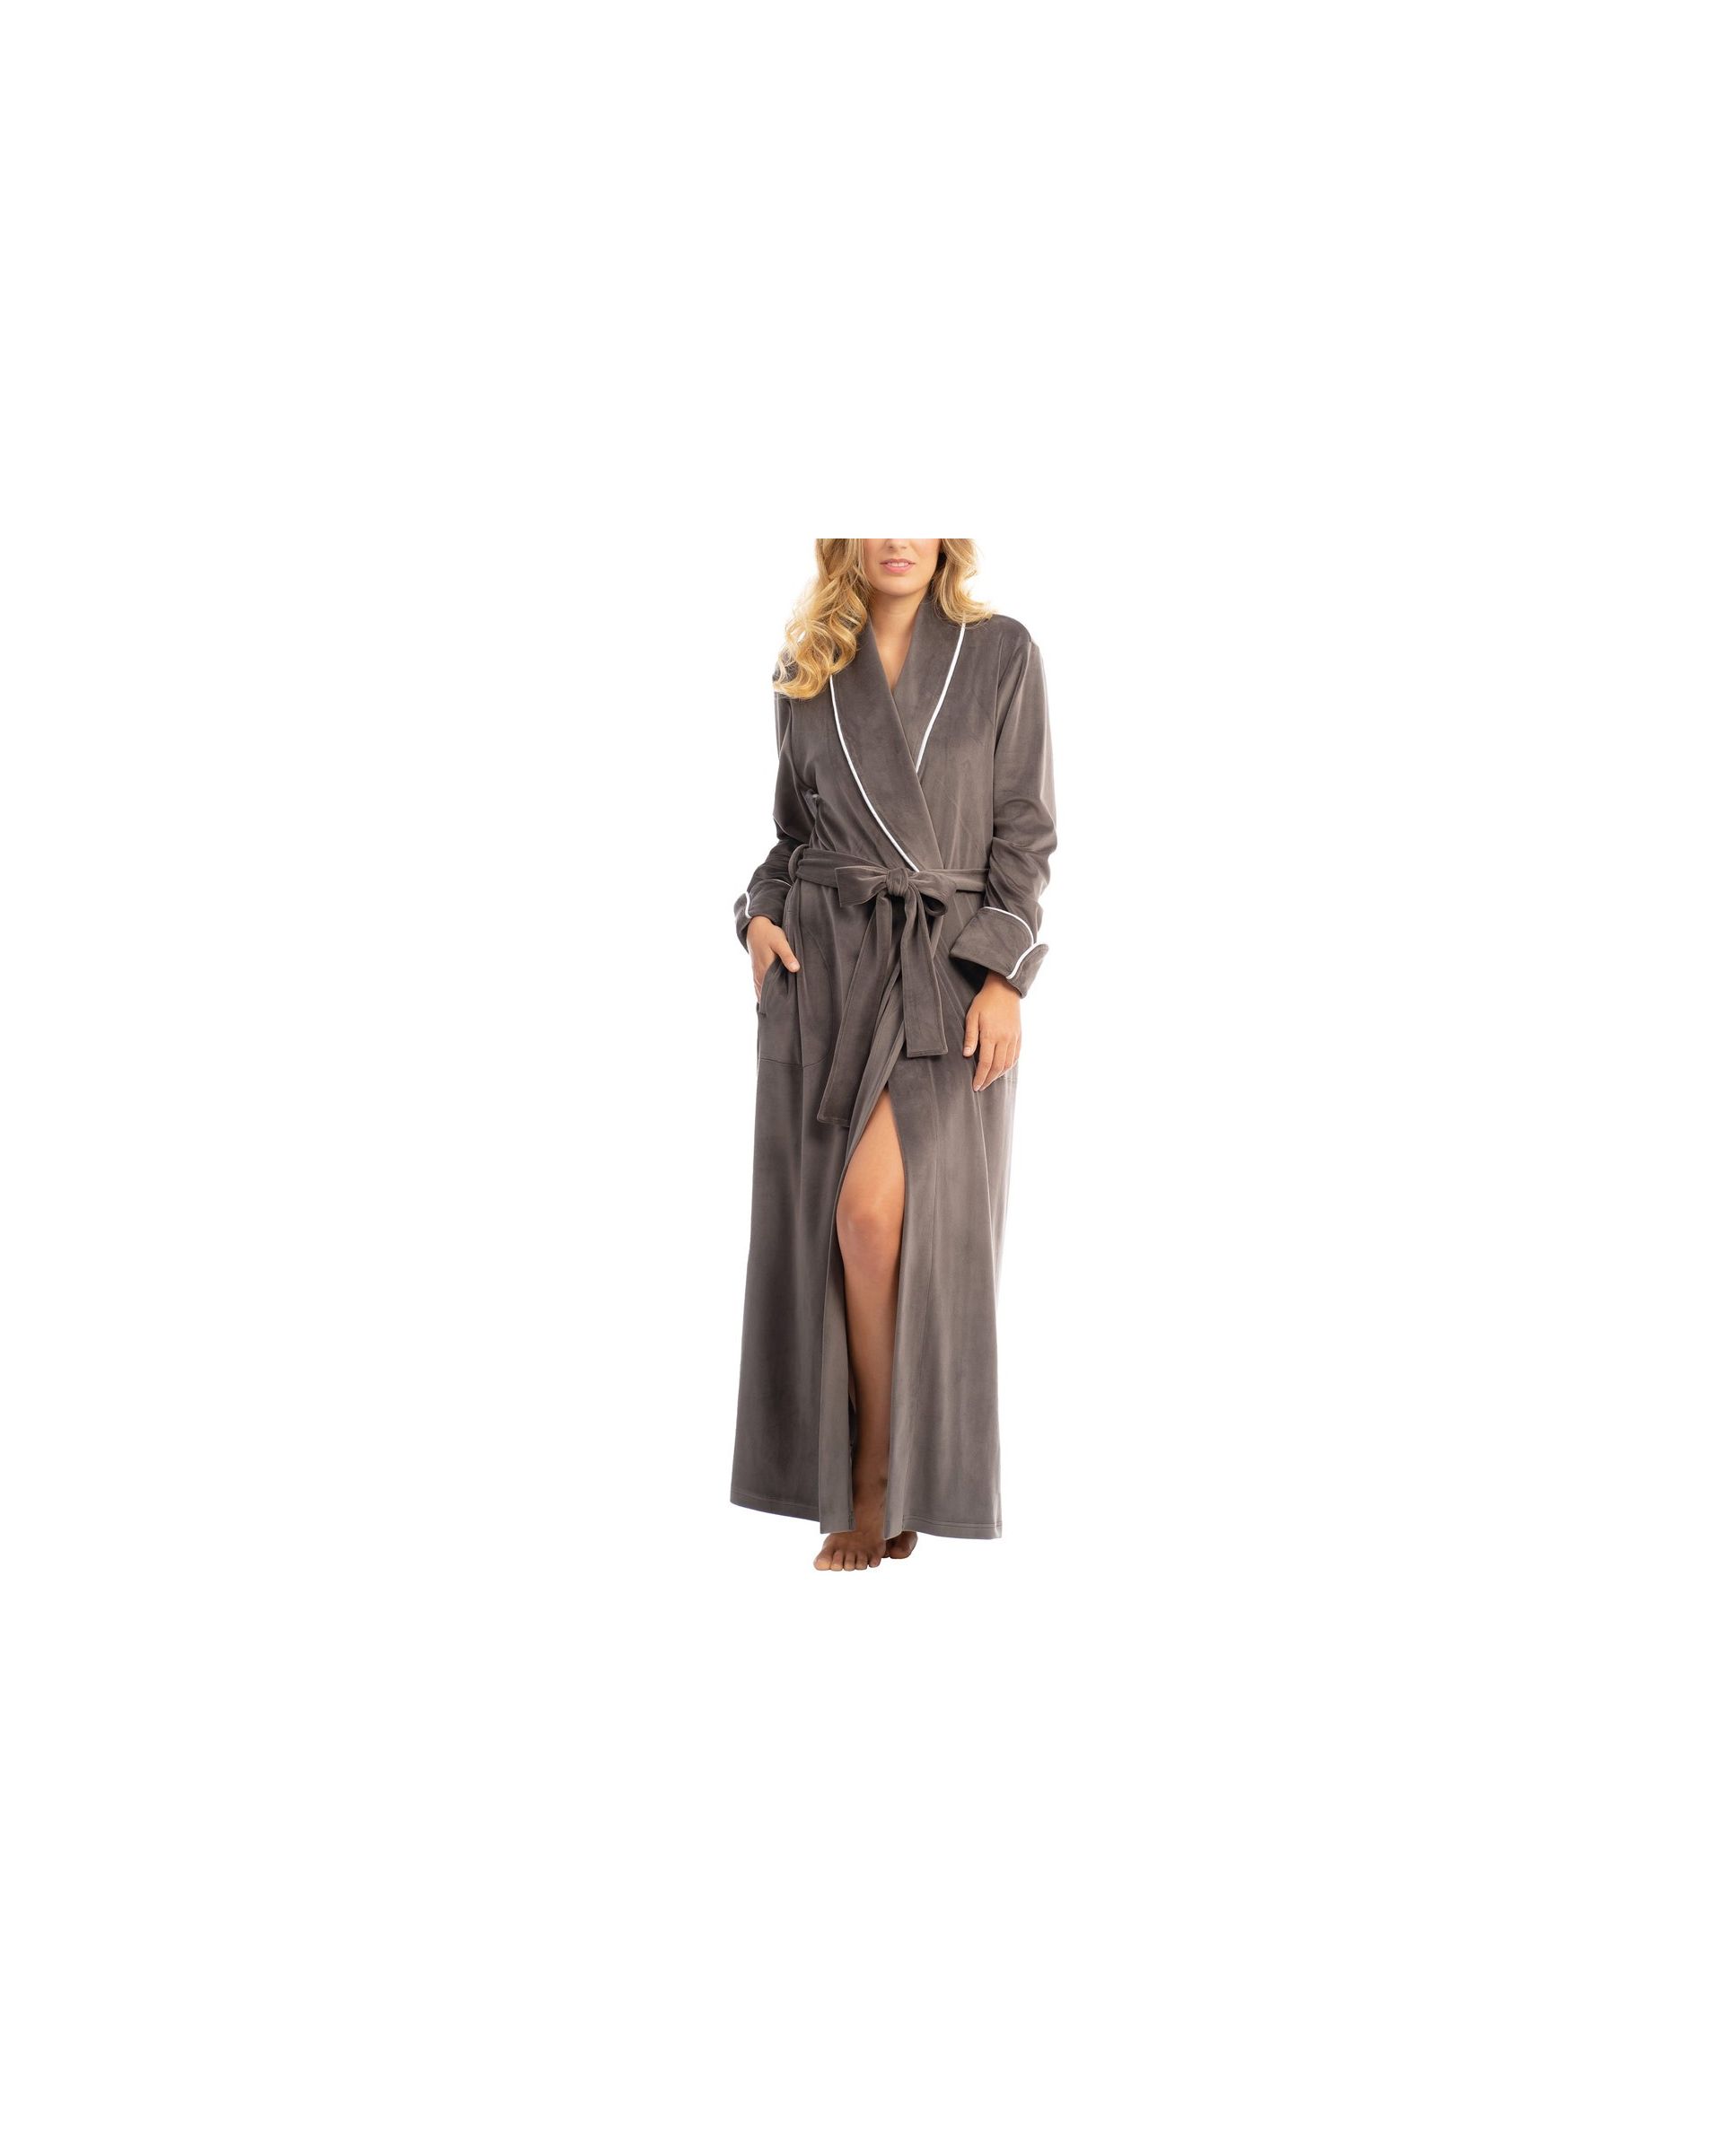 Stylish women's long velvet knotted robe with pockets for winter